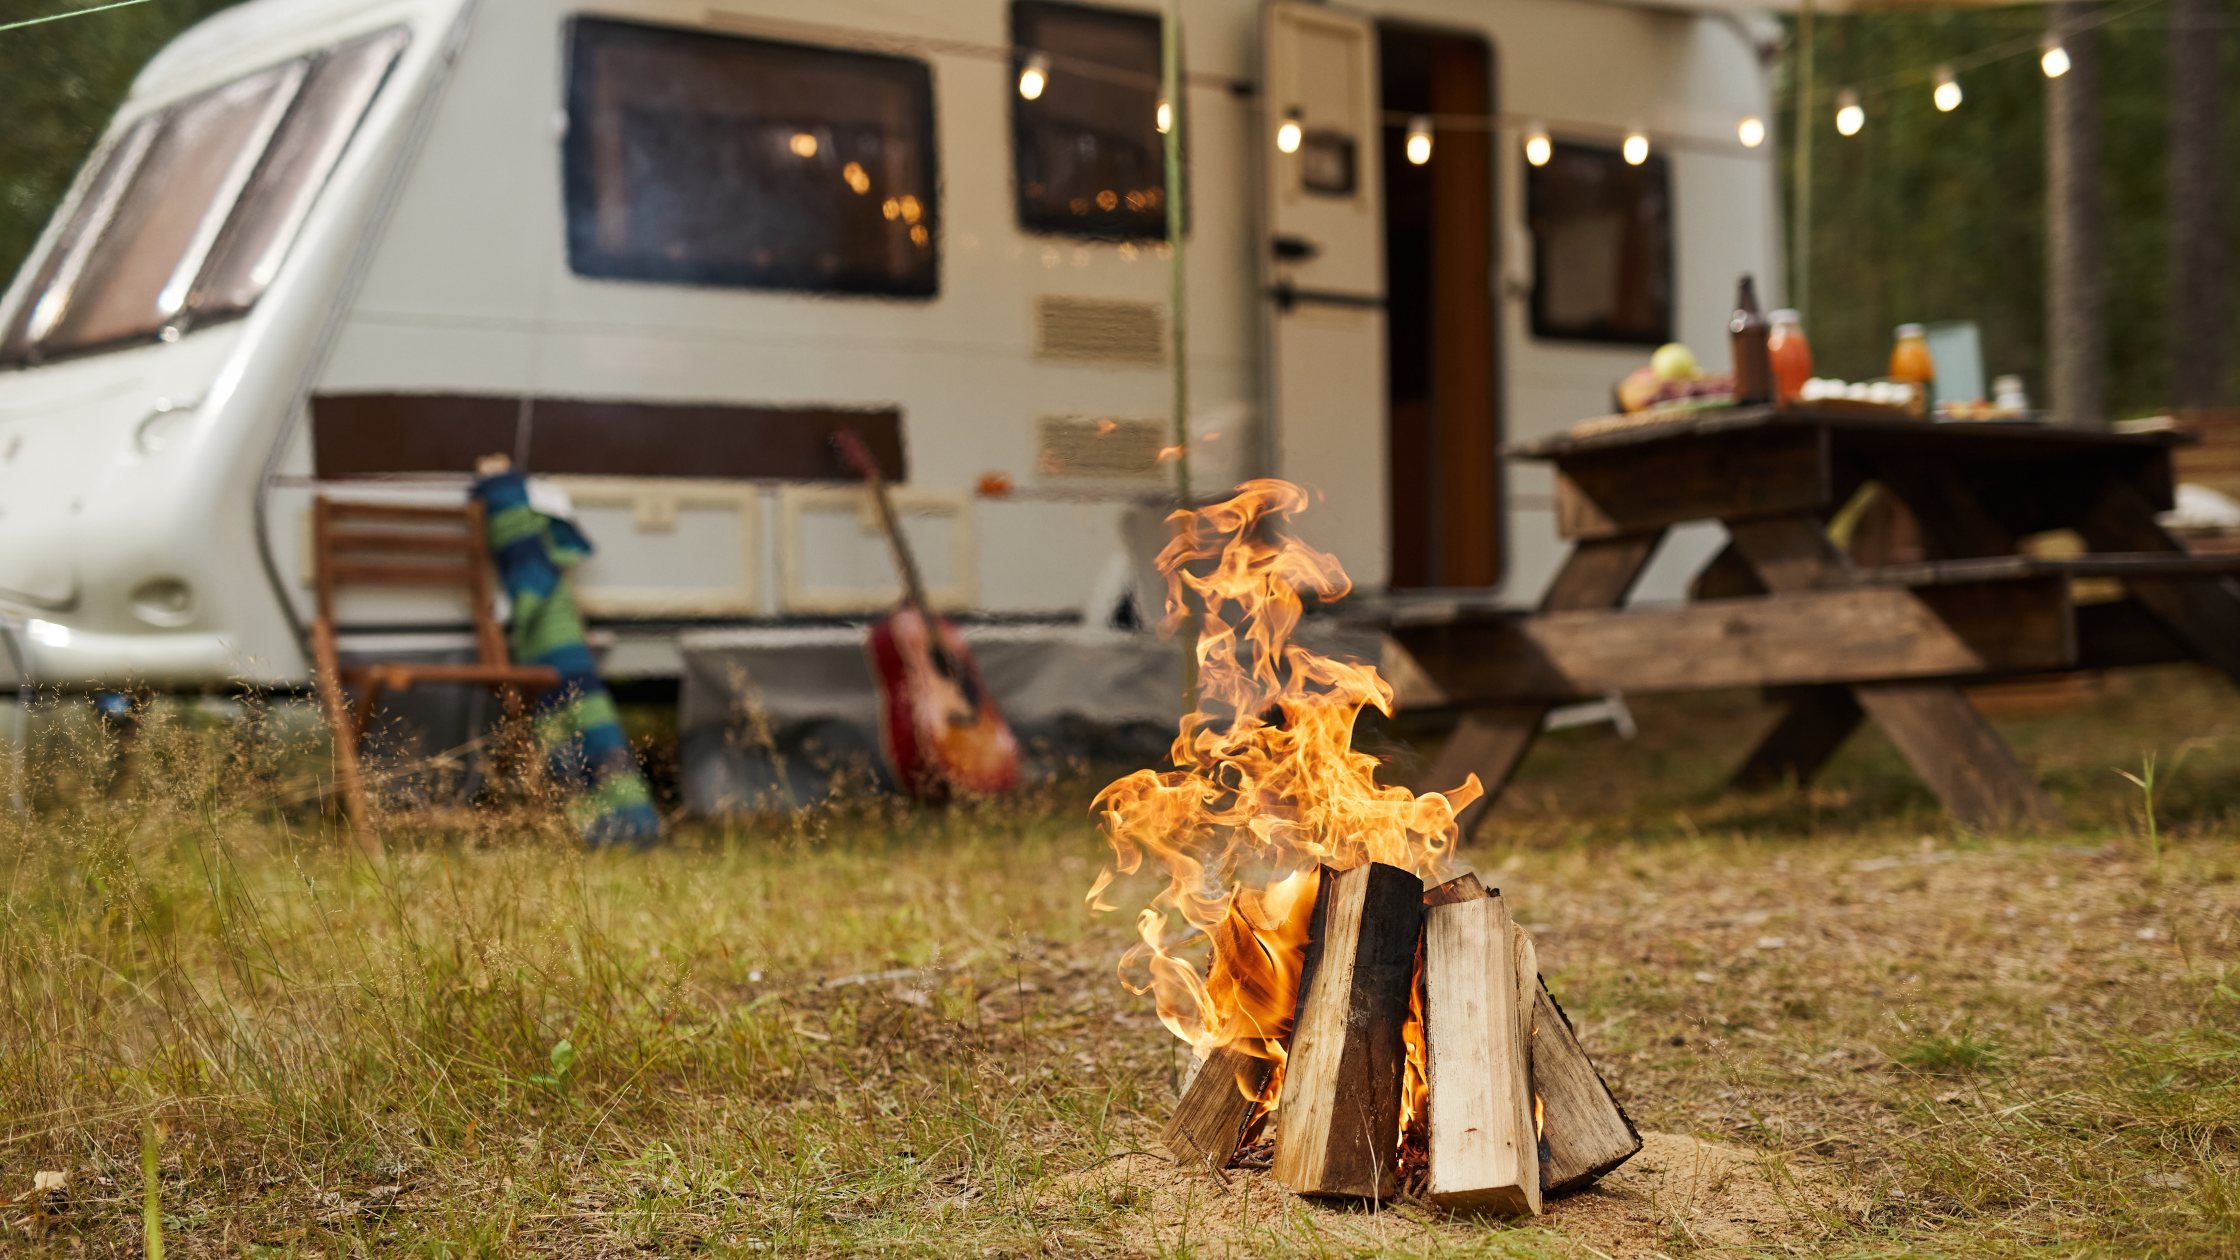 Renting Out Your RV? Here’s How to Make it a Success